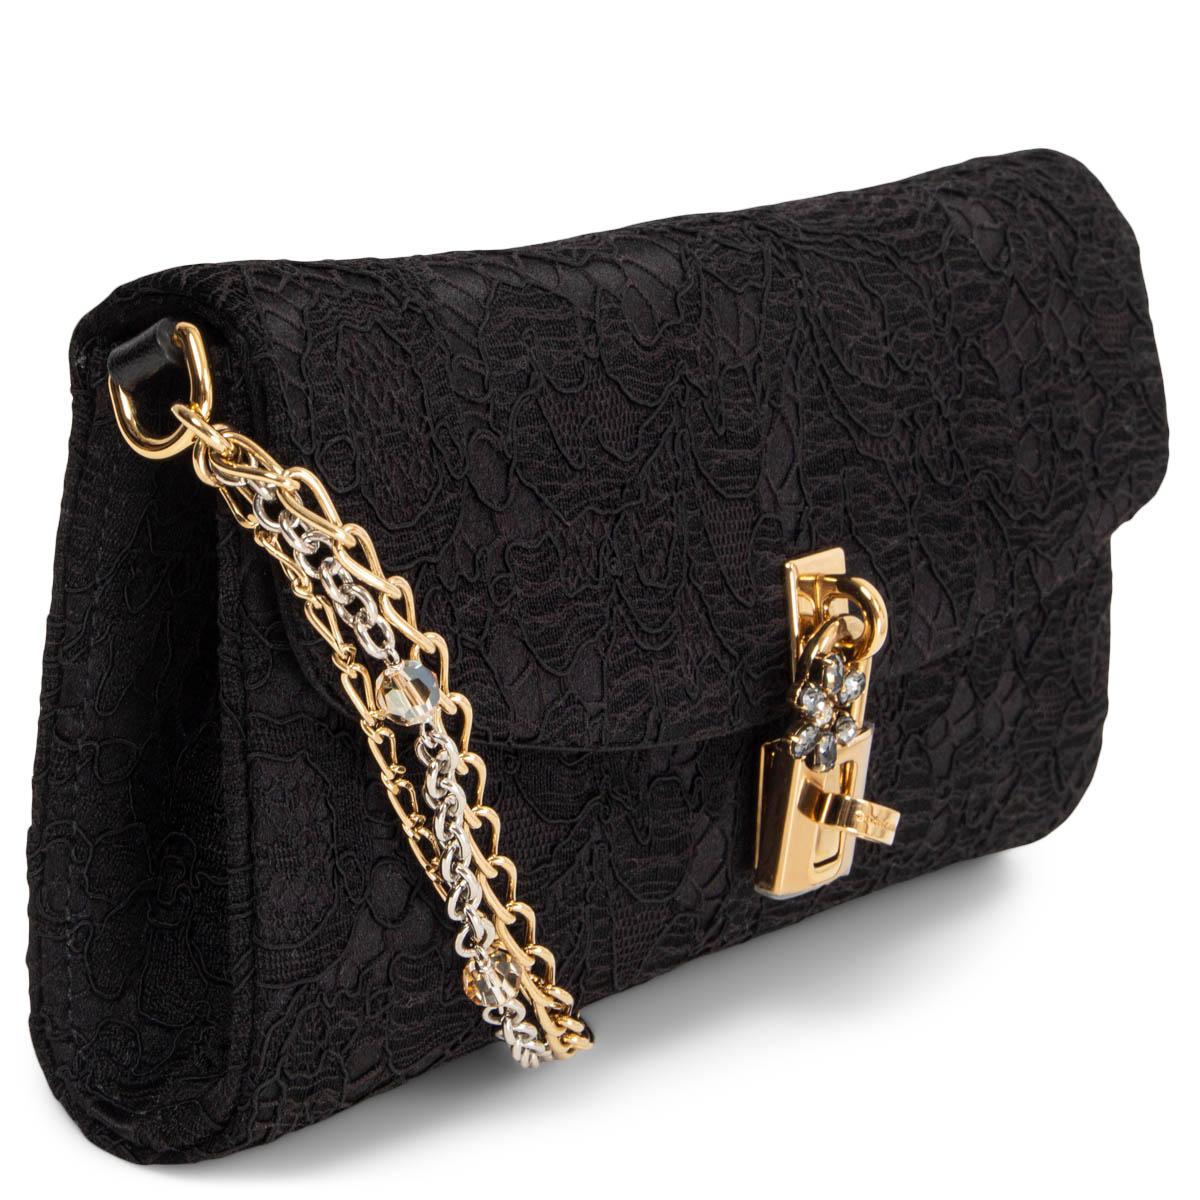 100% authentic Dolce & Gabbana Pizzo Taormina shoulder bag in black lace and satin with a crystal embellished gold-tone turn-lock closure. Lined in black satin with a slit pocket and a pocket lipstick mirror. Has a gold- and silver-tone chain-link